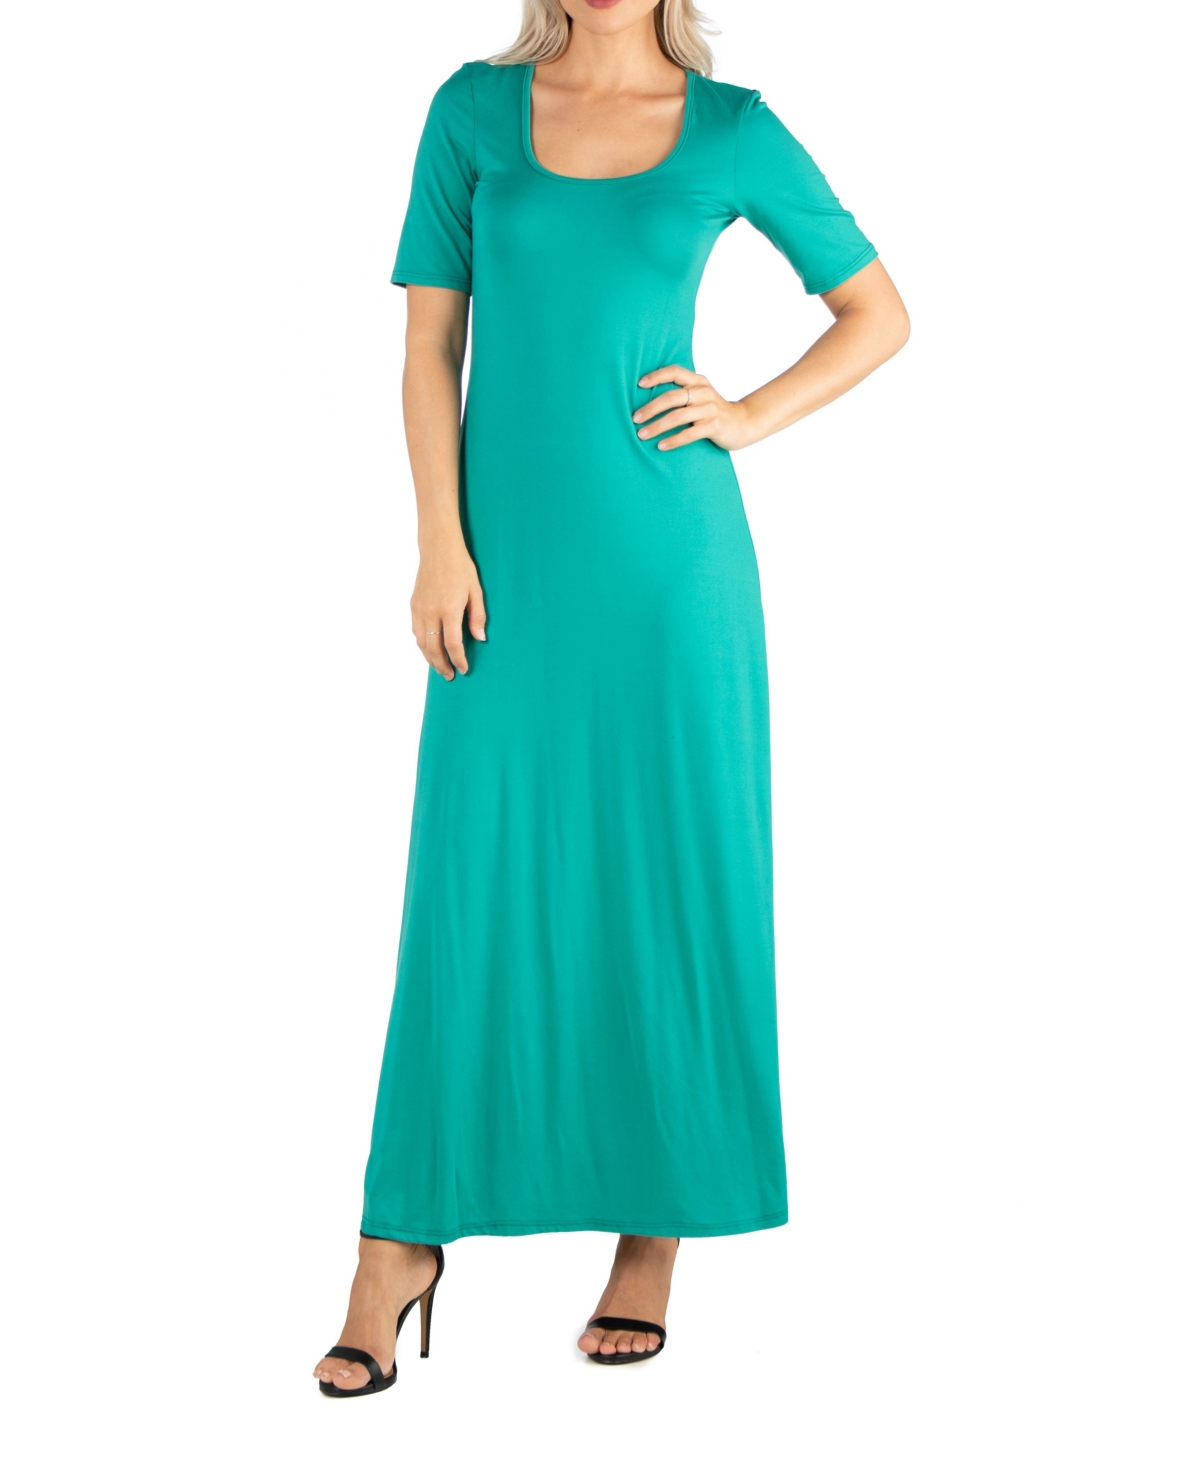 Women's Casual Maxi Dress with Sleeves - Jade